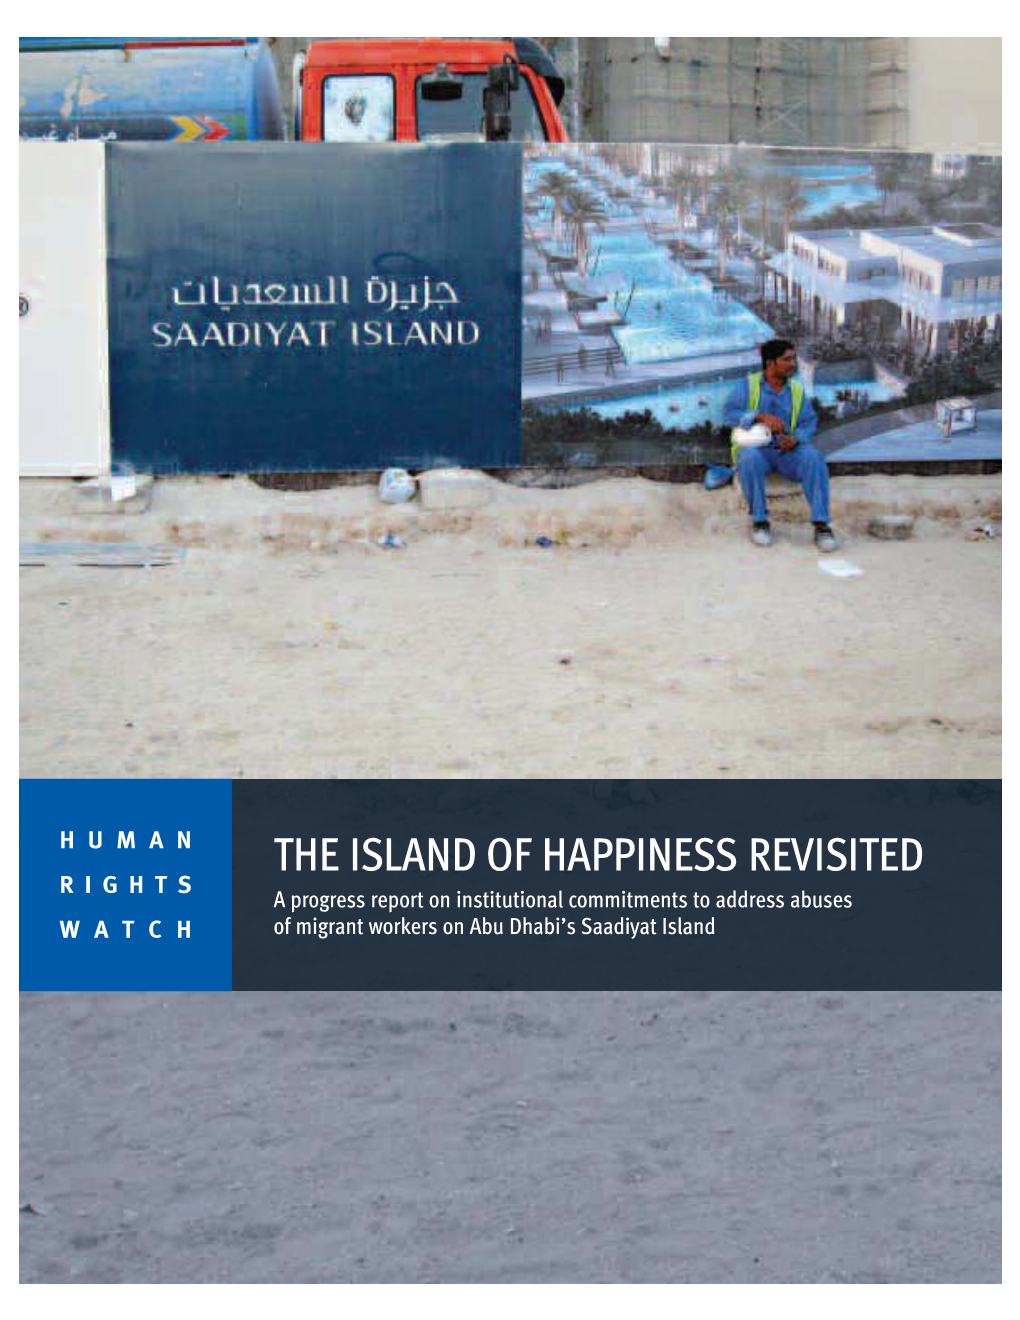 A Progress Report on Institutional Commitments to Address Abuses of Migrant Workers on Abu Dhabi’S Saadiyat Island